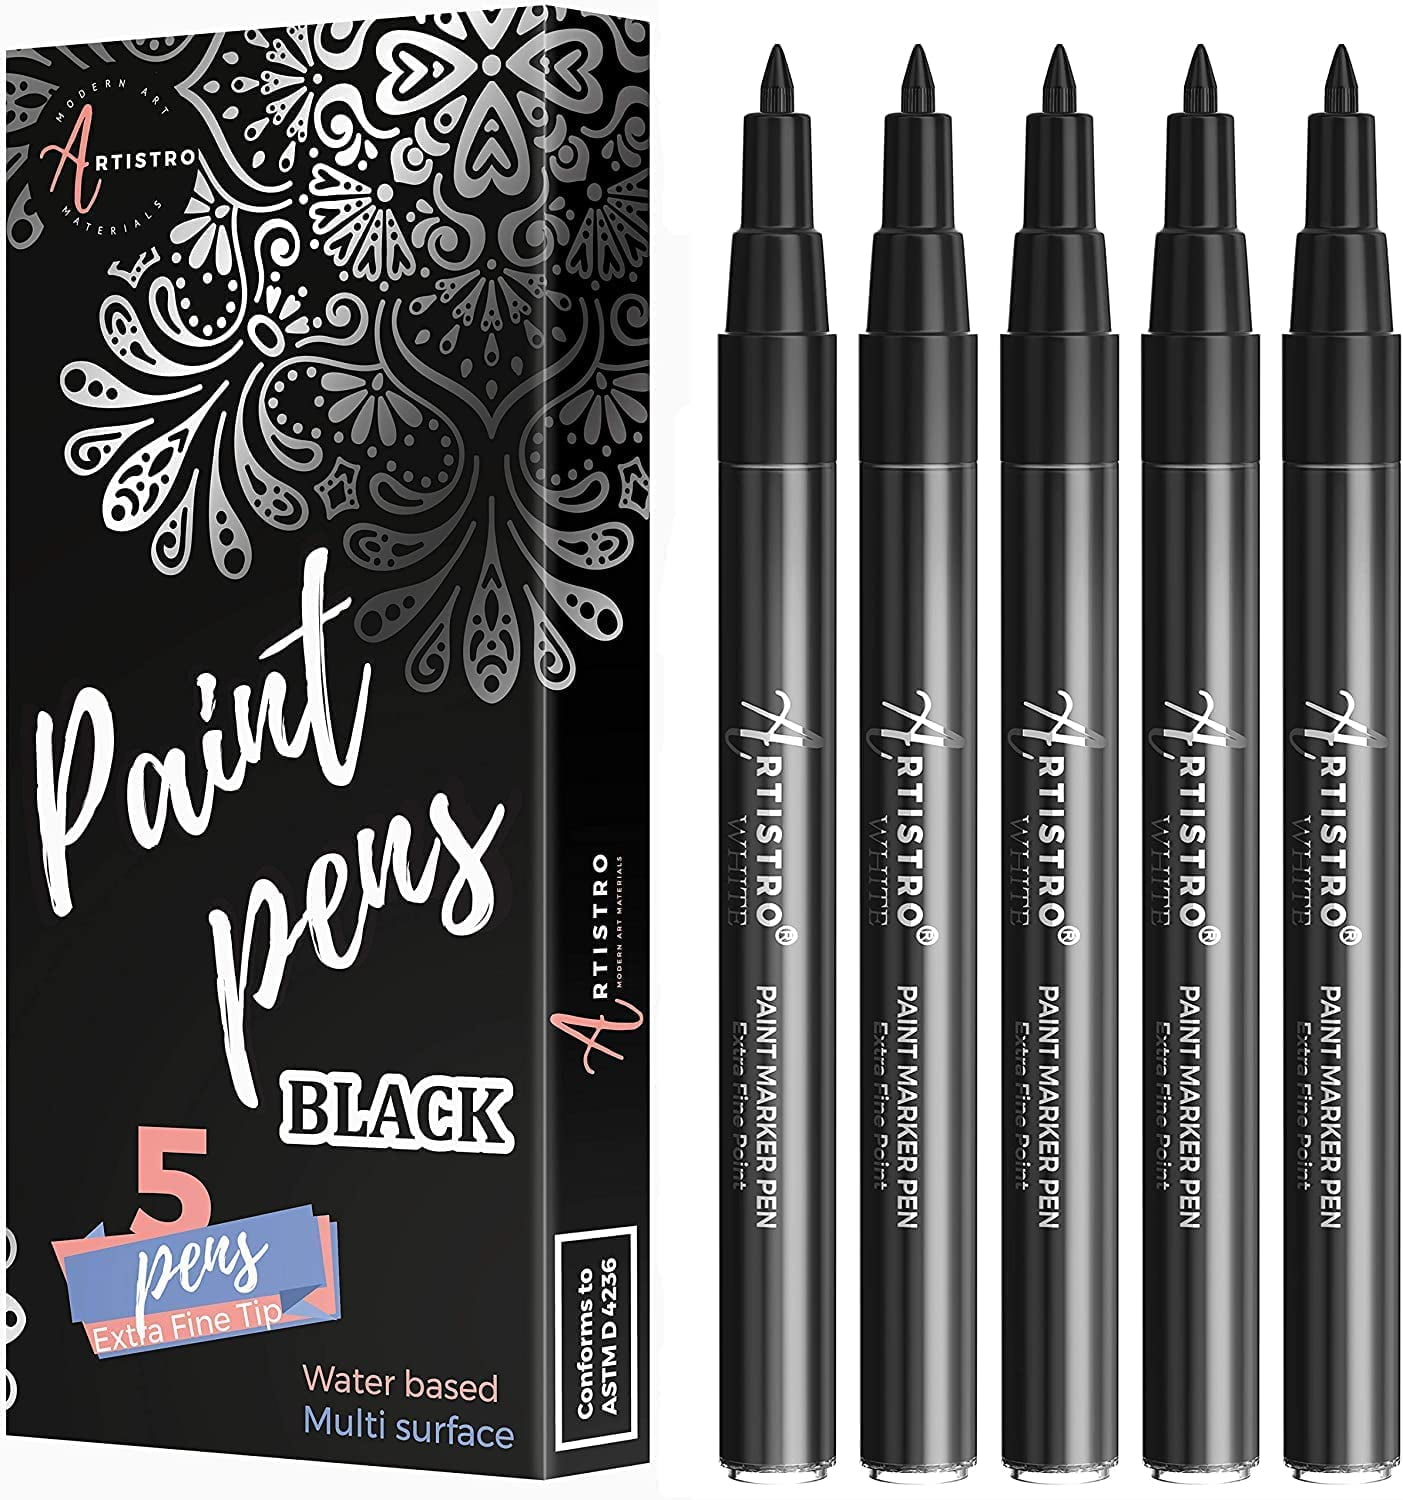  ARTISTRO 15 Permanent Oil Based Paint Markers Fine Tip